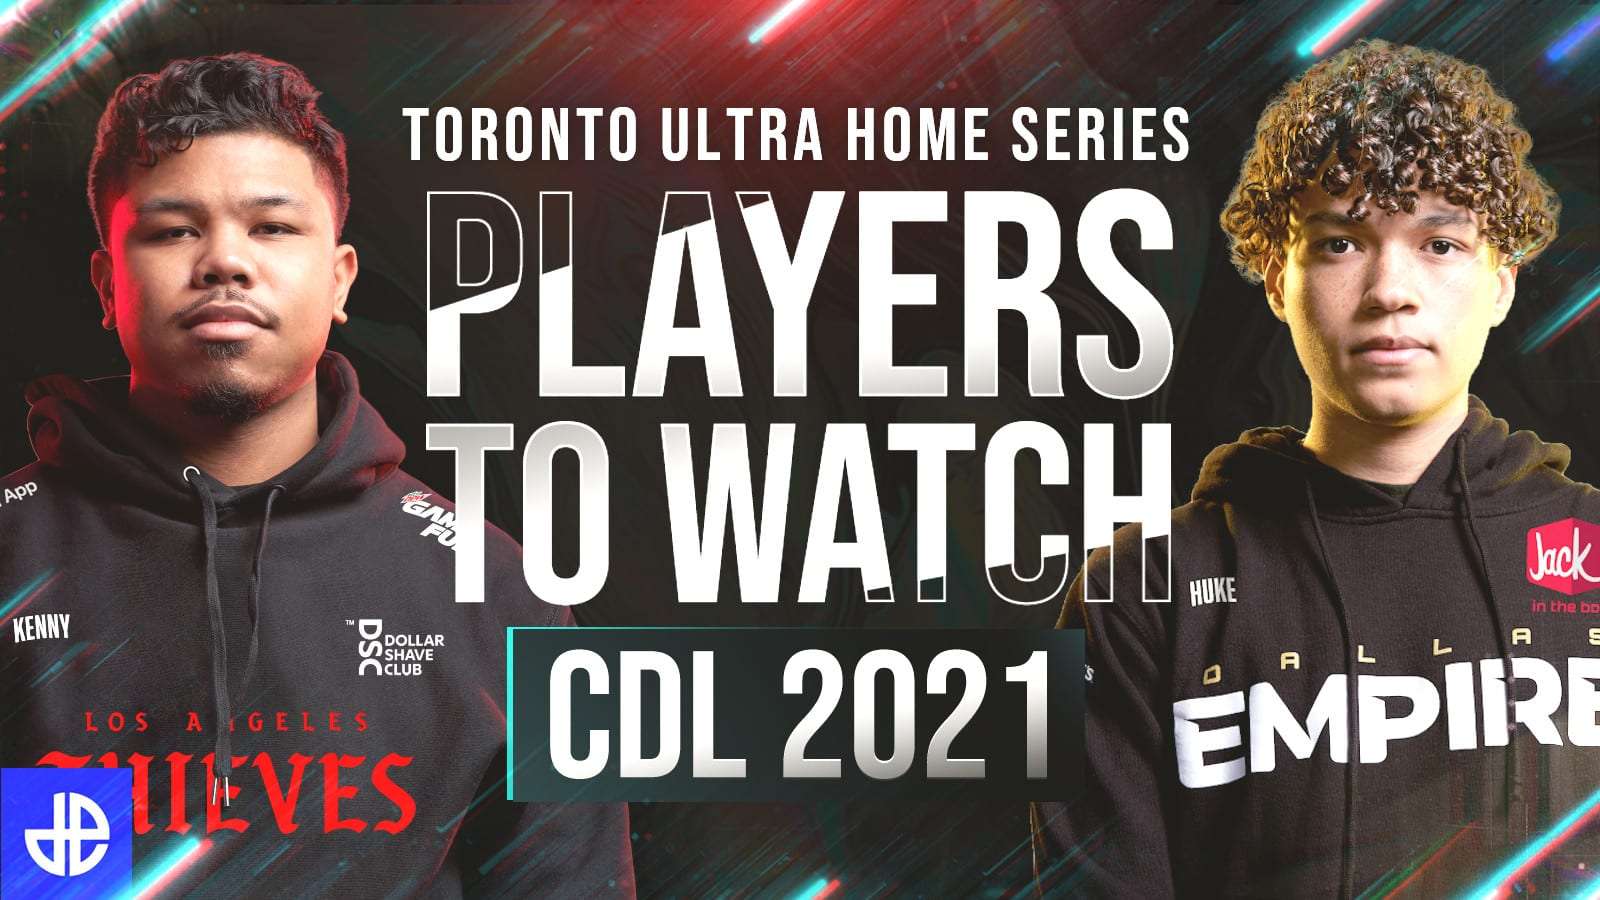 cdl 2021 players to watch toronto home series header